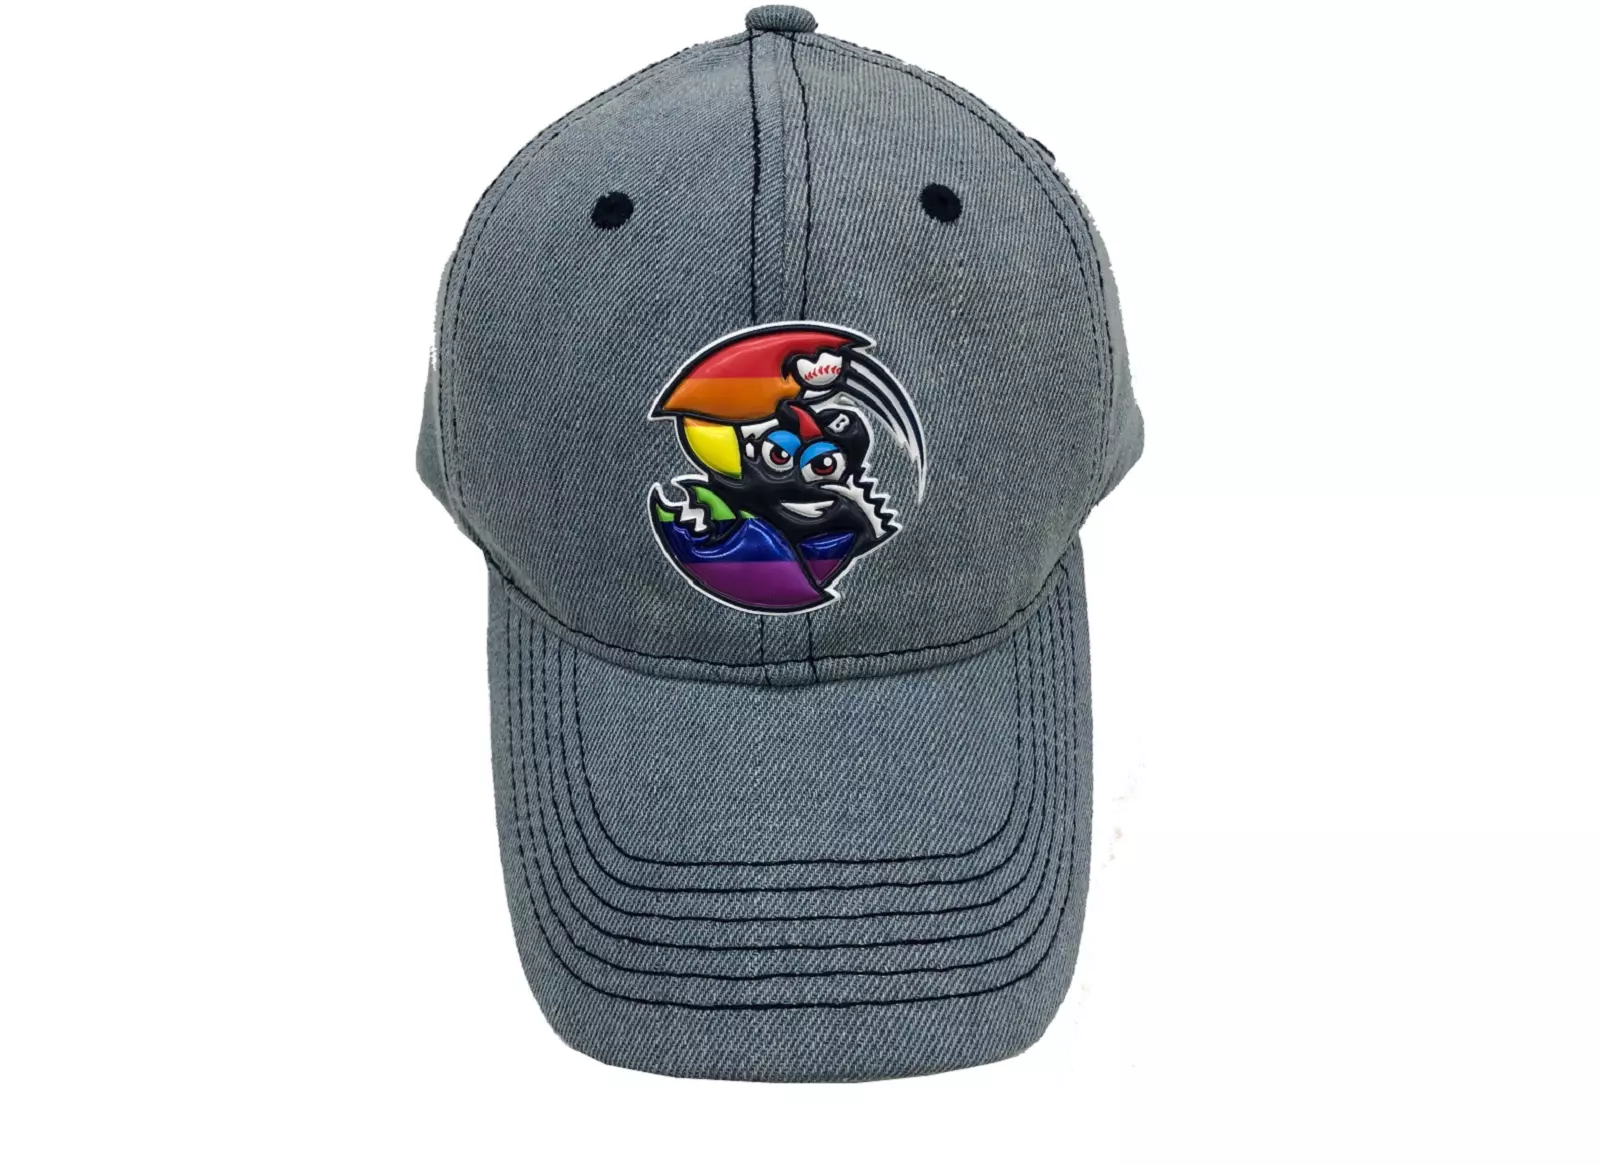 Pride Night with the BlueClaws, 06/07/2022